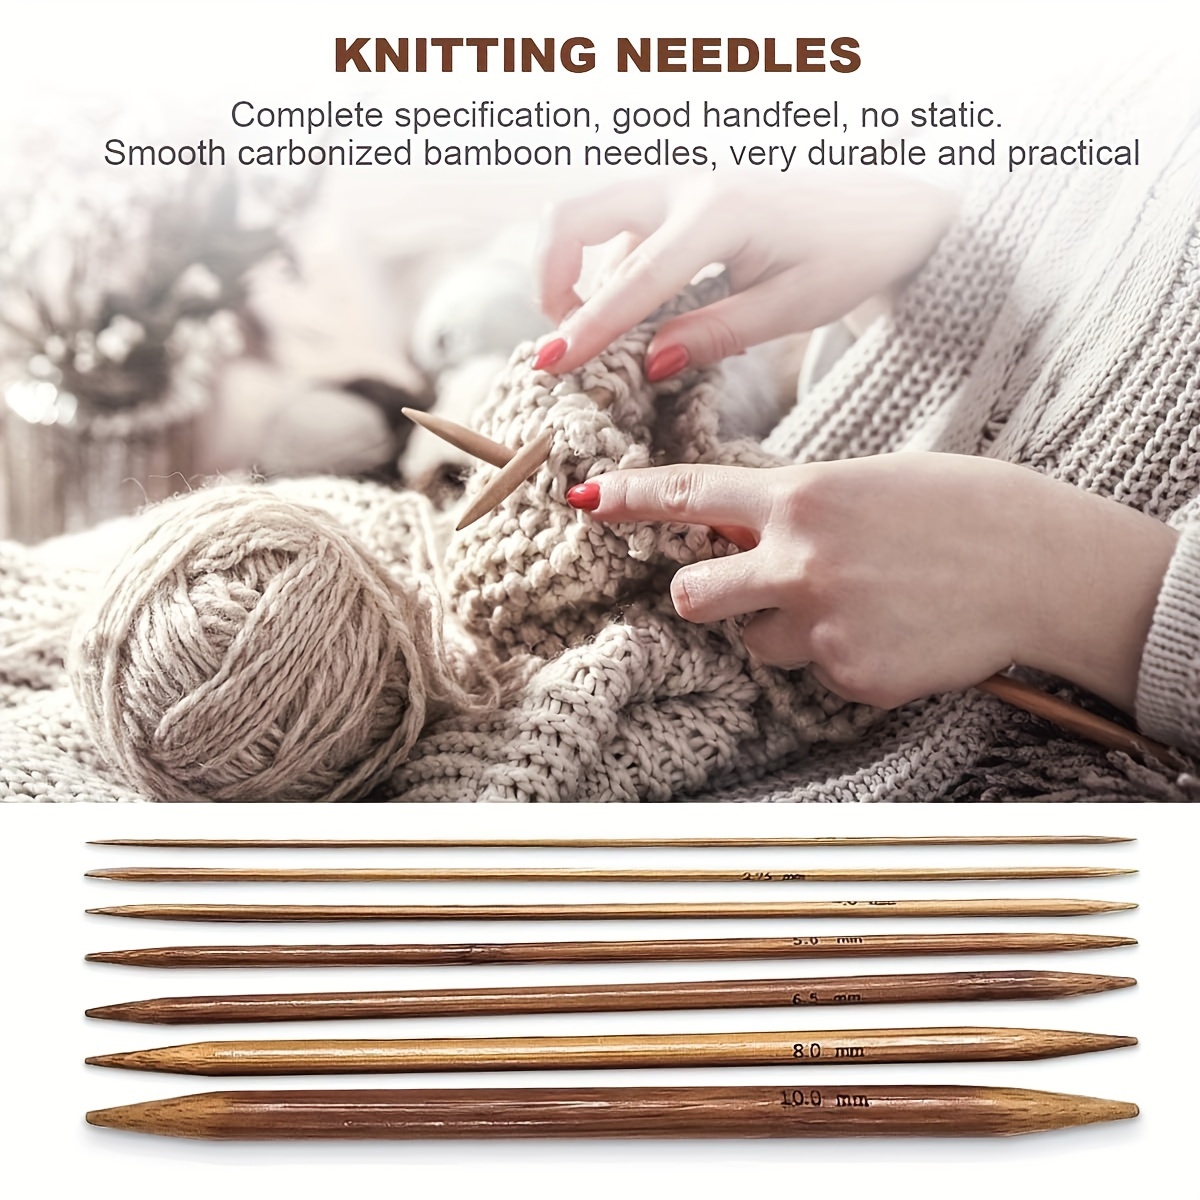 

75pcs Bamboo Knitting Needles Set, Double Pointed Handmade Knitting Needles For Beginners And Professionals, Knitting Needles Set 2 To 10mm For Socks, Gloves And Scarves